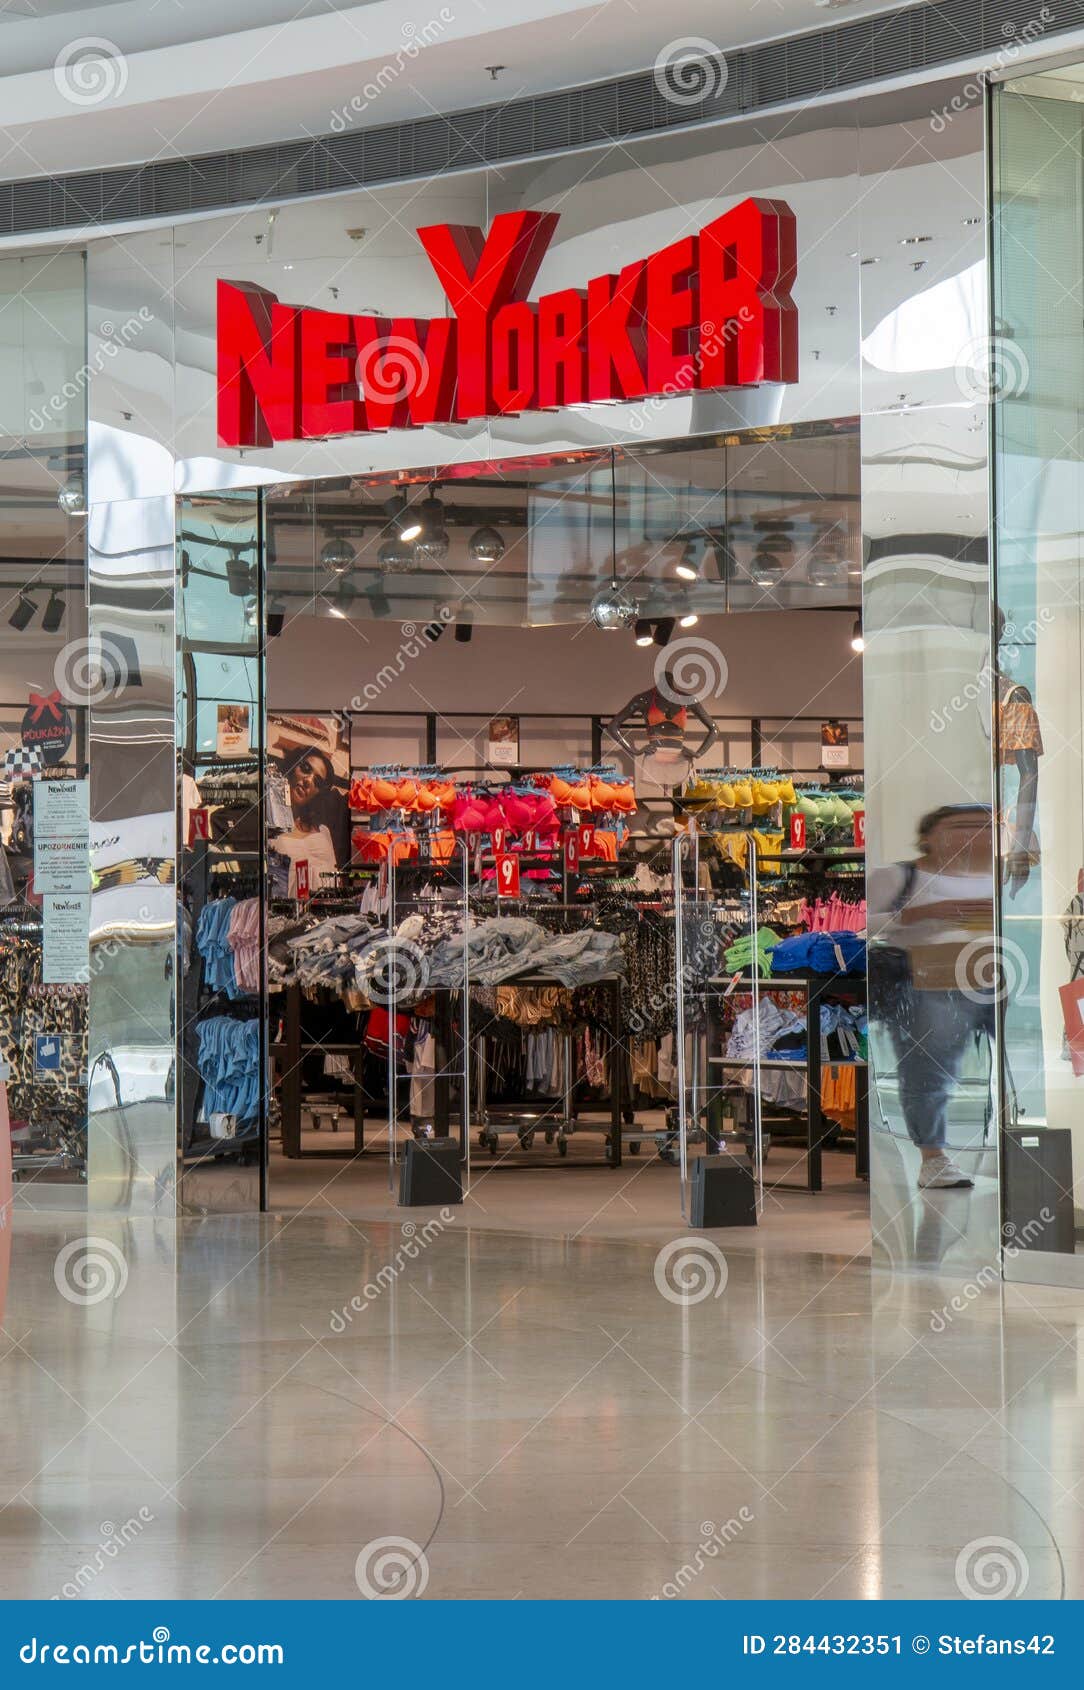 New Yorker Store Front in the Shopping Mall Eurovea. New Yorker is a German  Clothing Editorial Photo - Image of chain, brand: 284432351